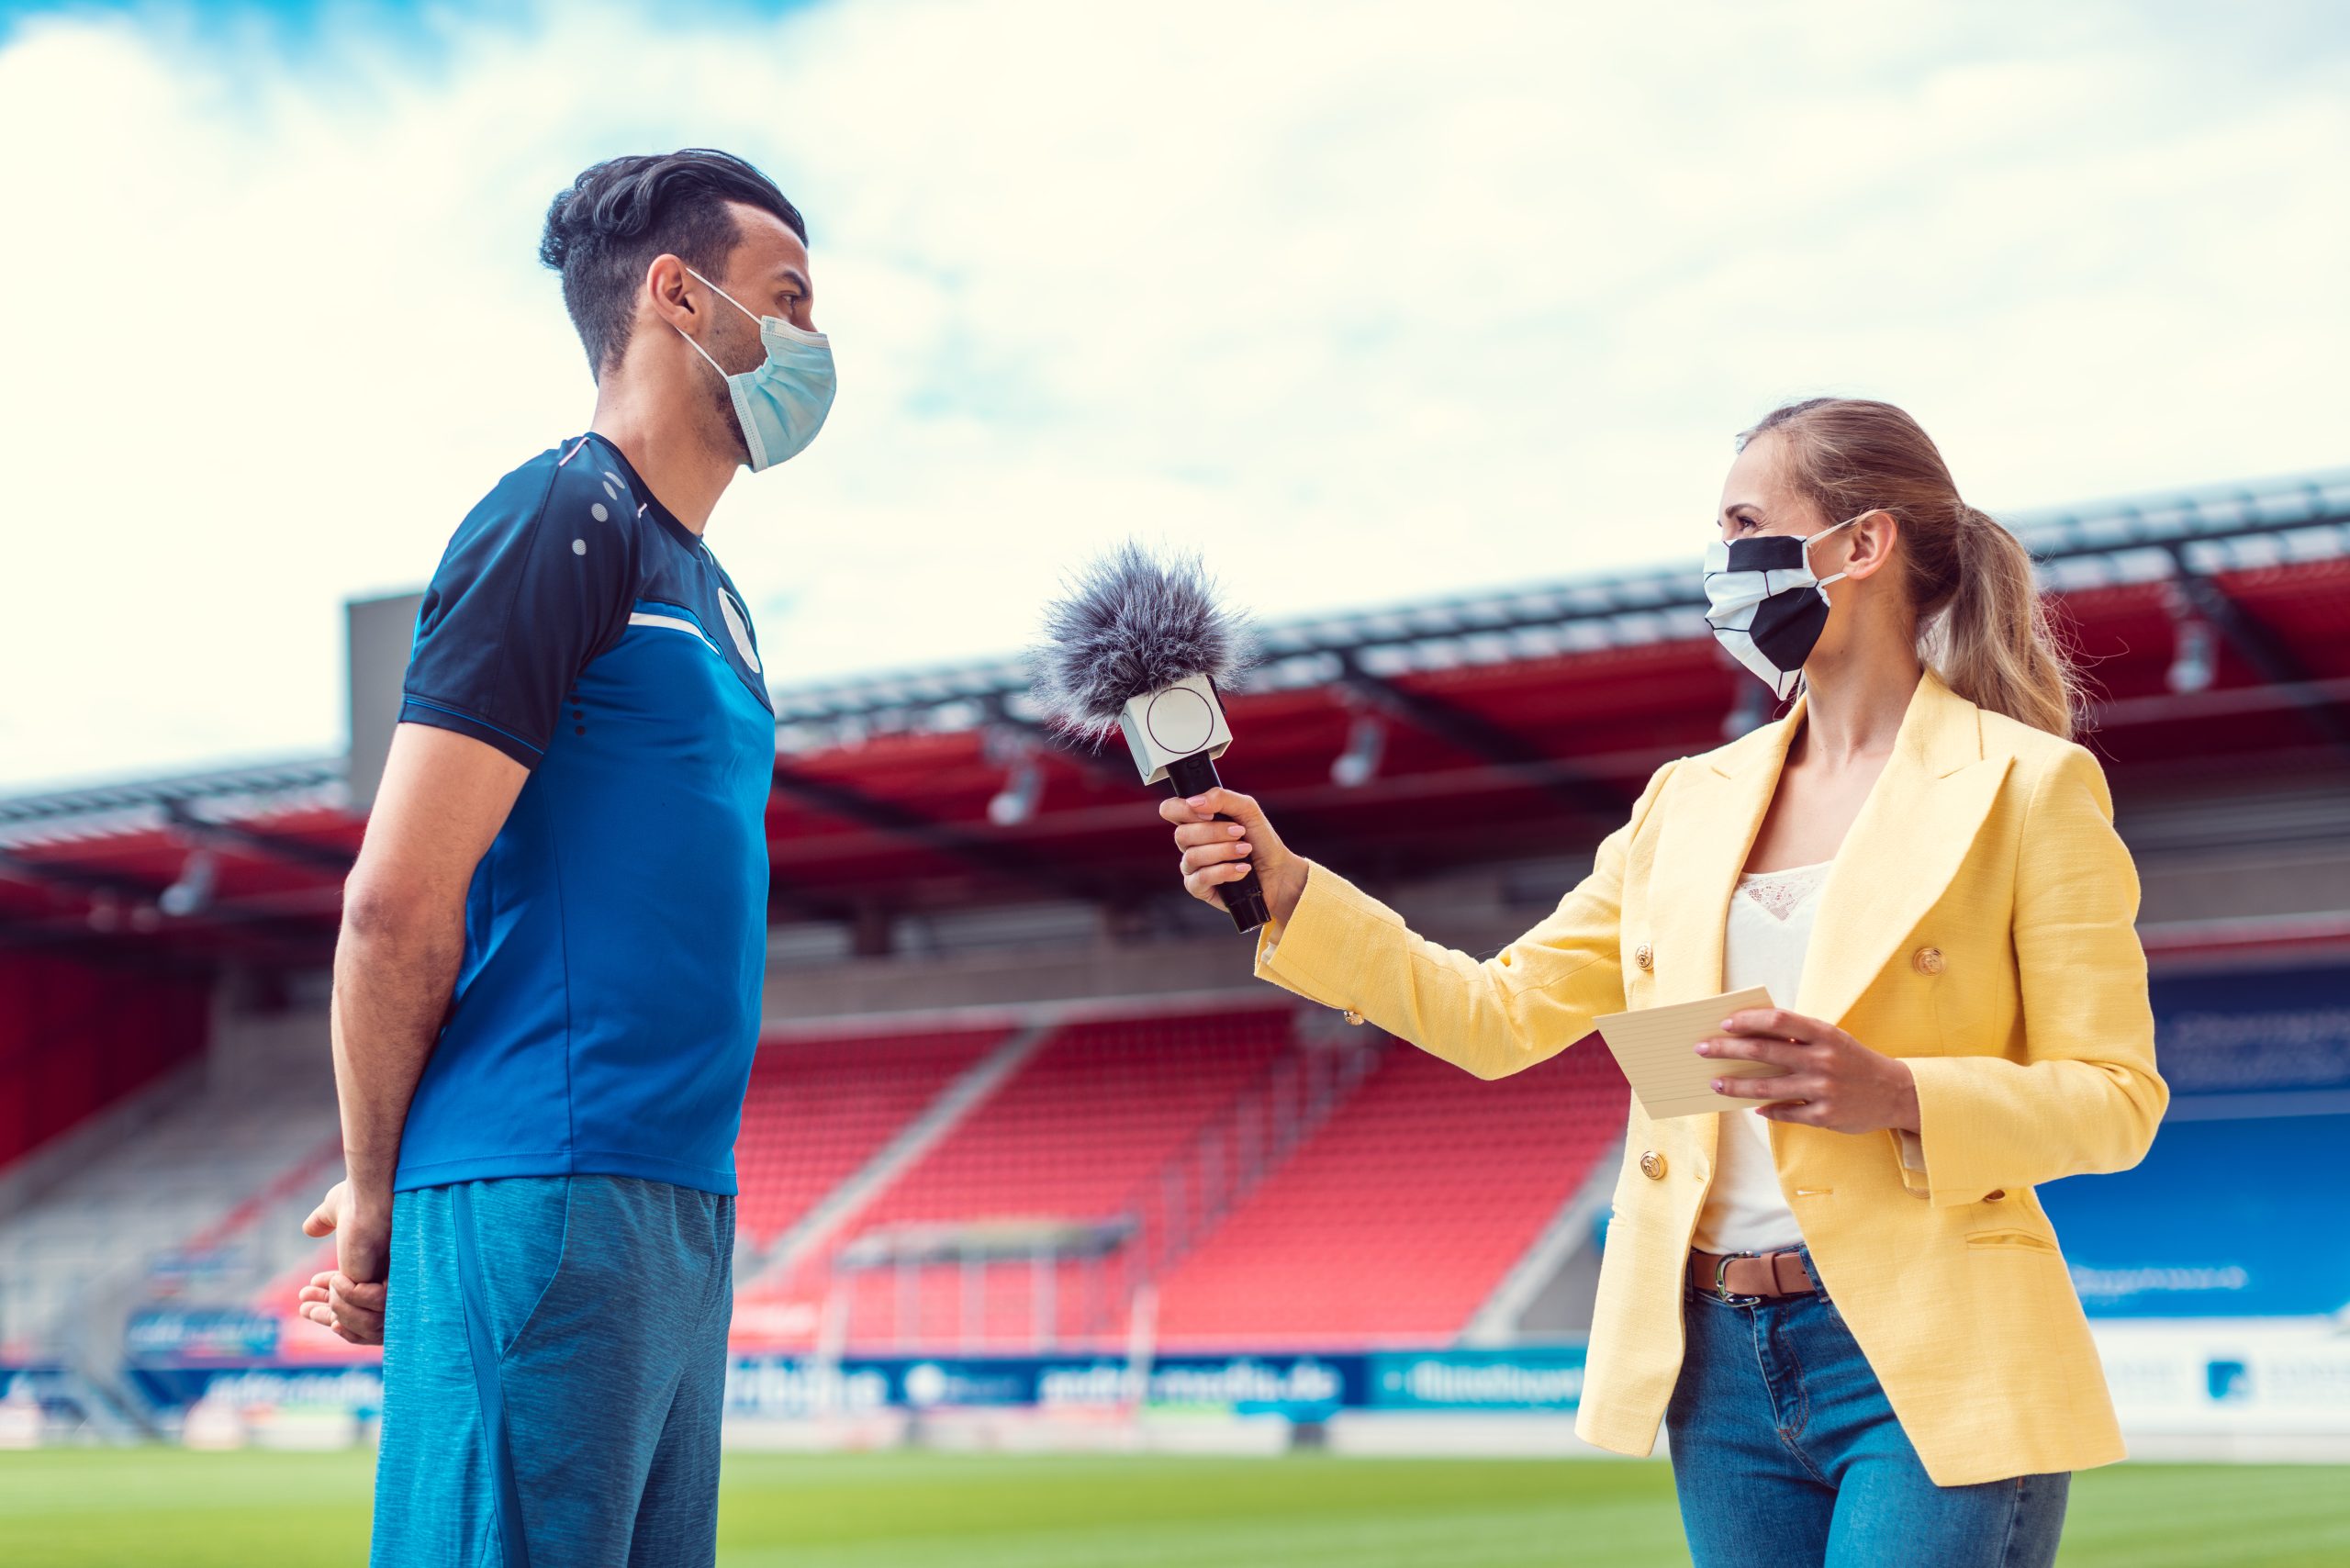 What You Need to Know About Becoming a Sports Analyst